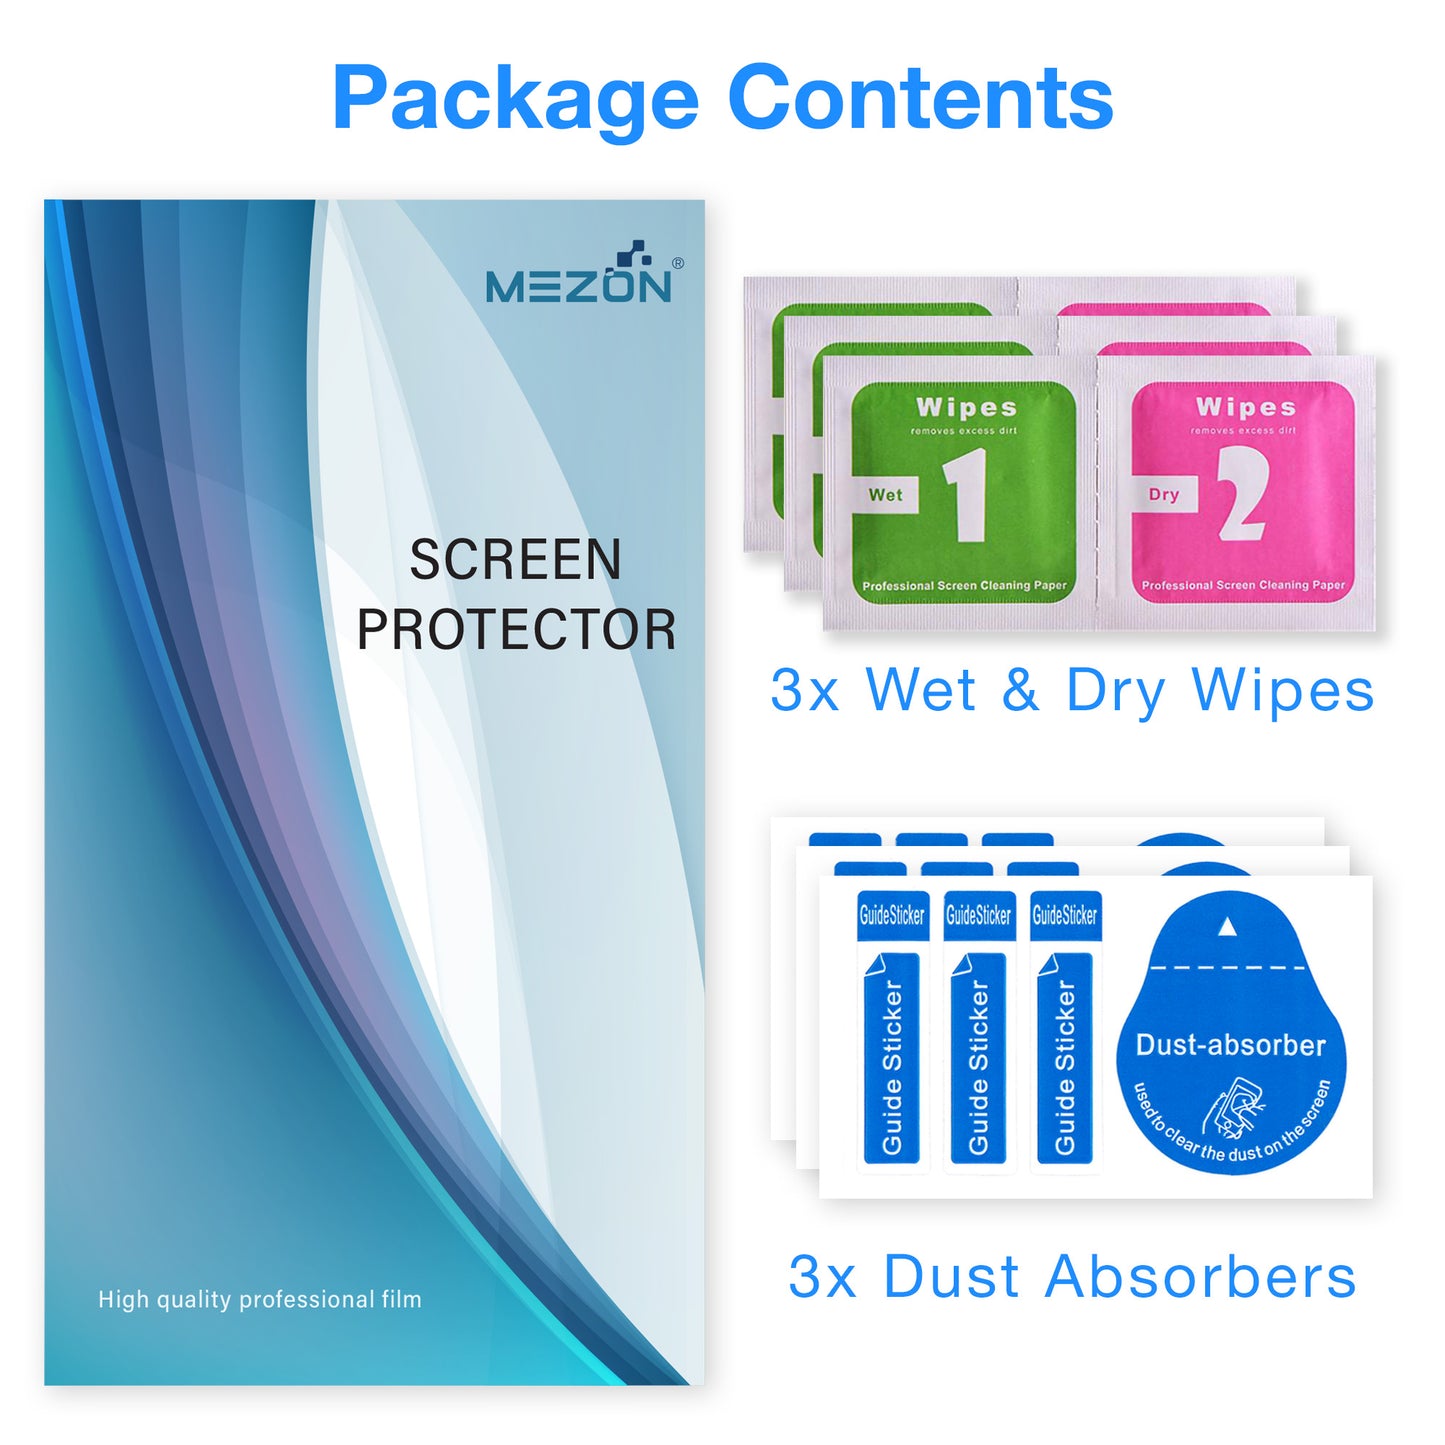 [3 Pack] MEZON Realme C11 Ultra Clear Screen Protector Case Friendly Film (Realme C11, Clear)